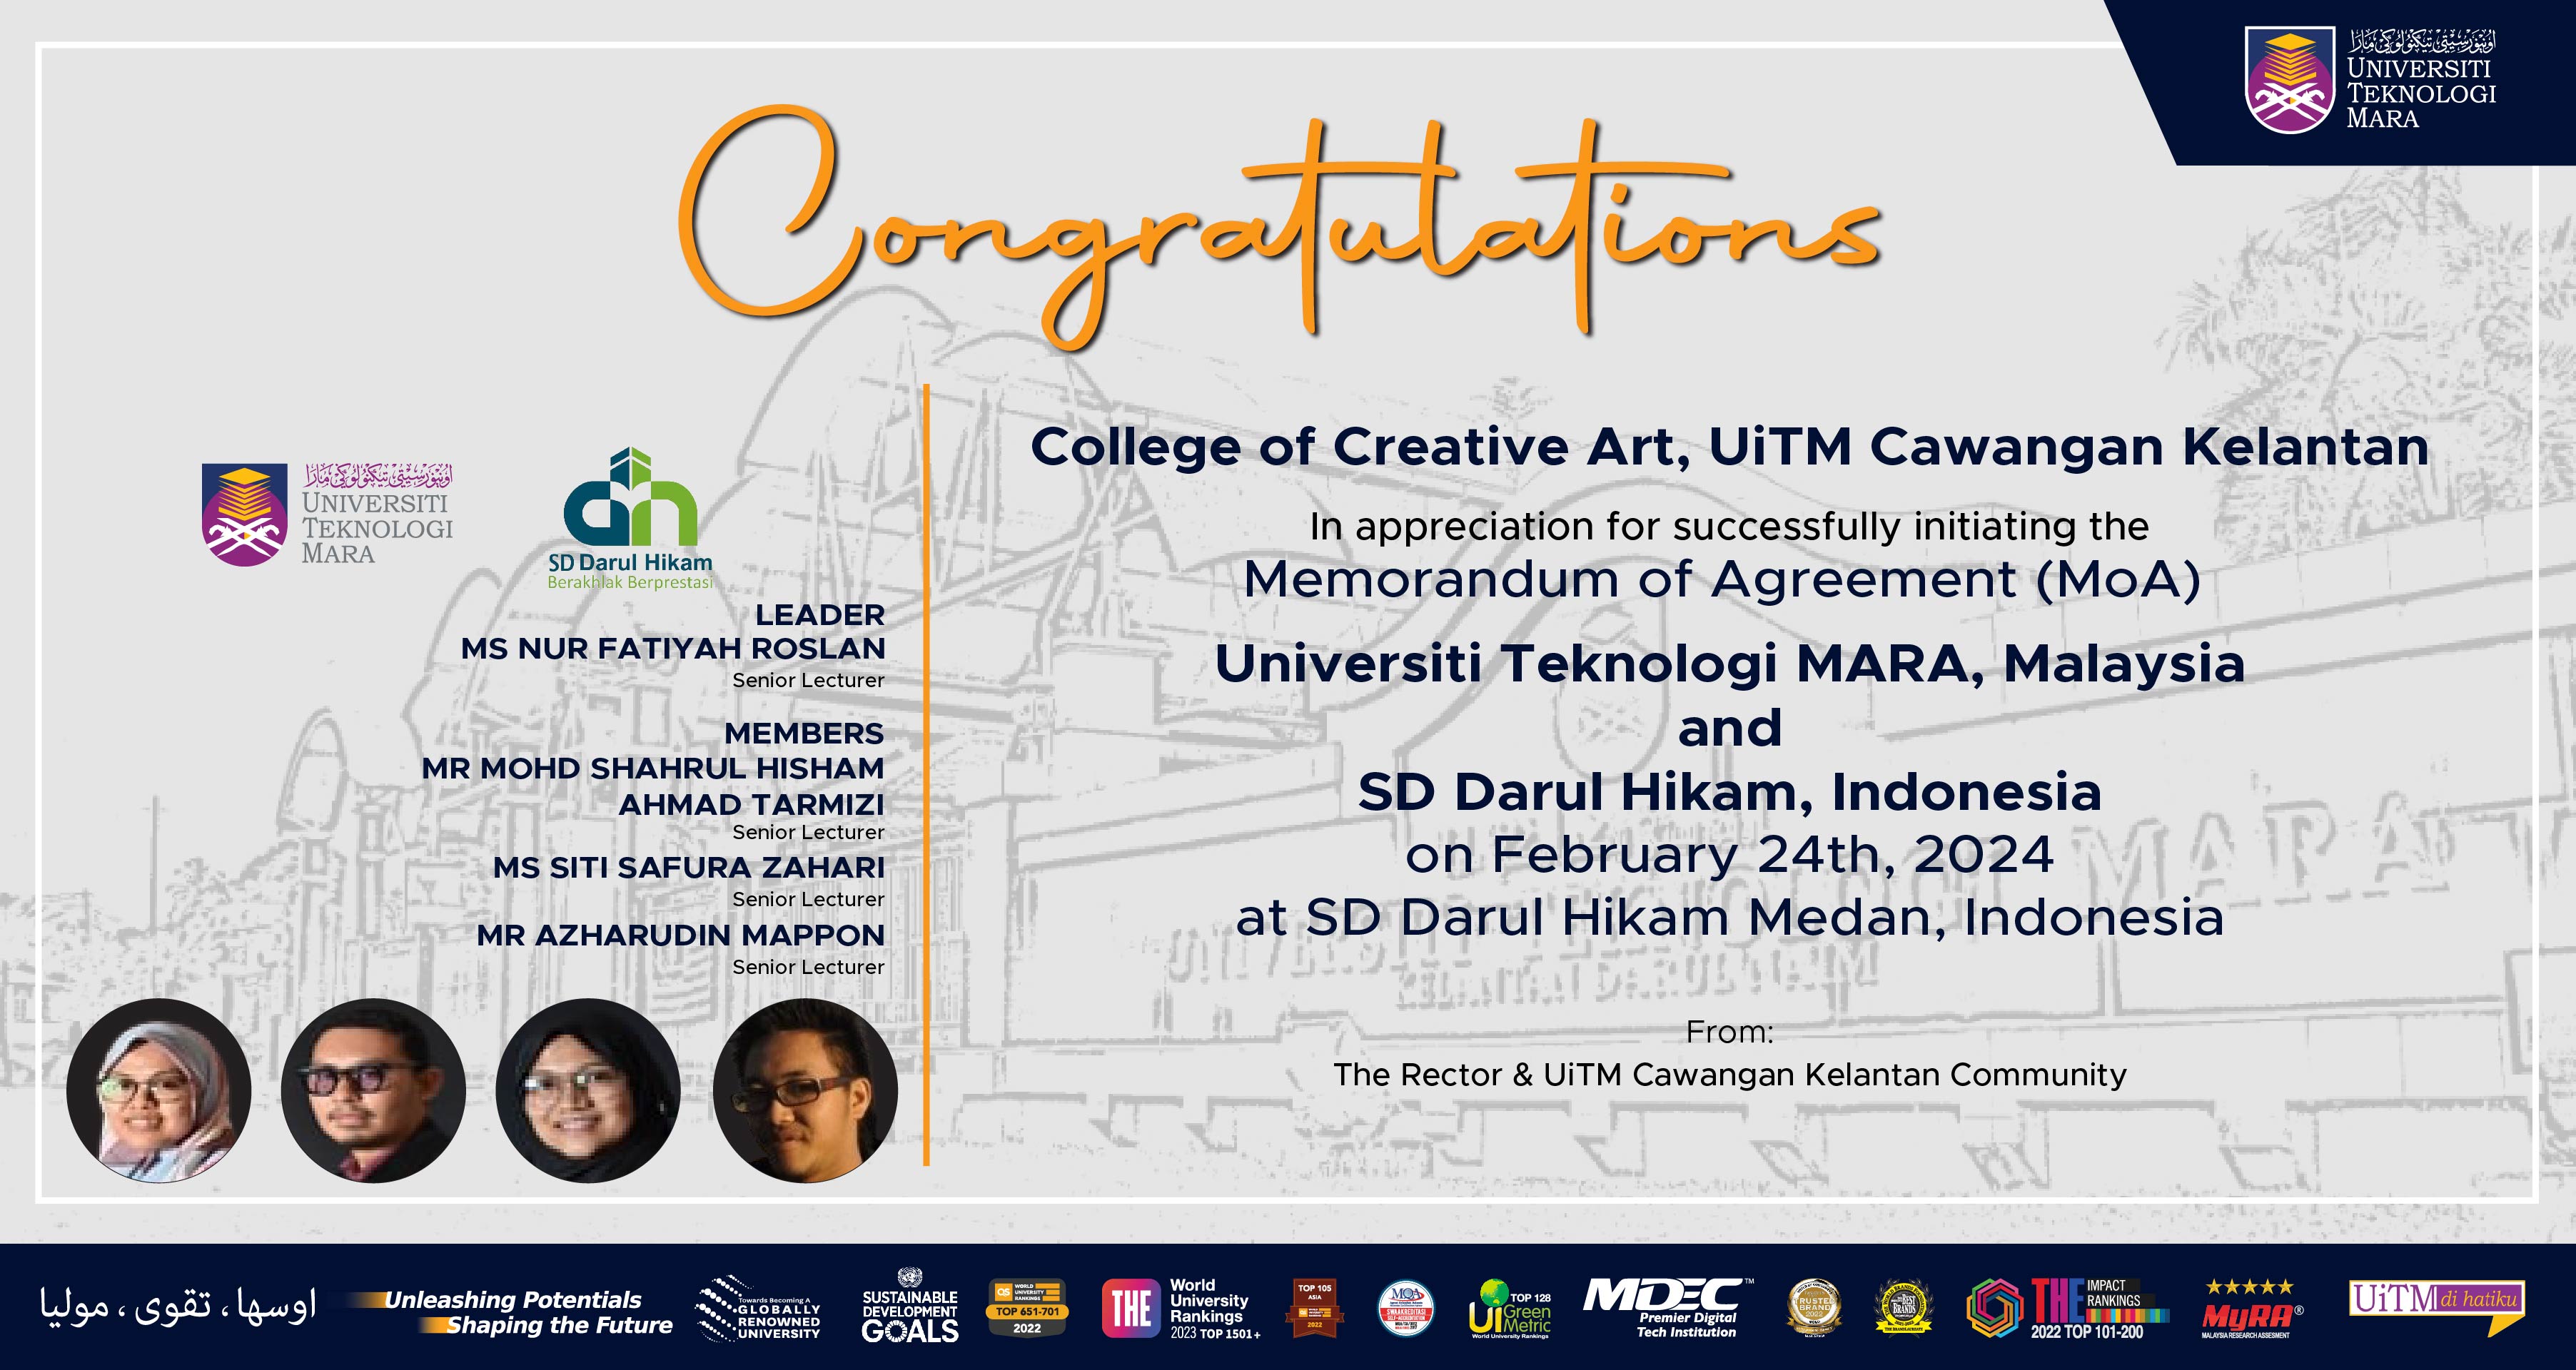 Congratulations!!! College of Creative Art, MoA between UiTM, Malaysia and SD Darul Hikam, Indonesia